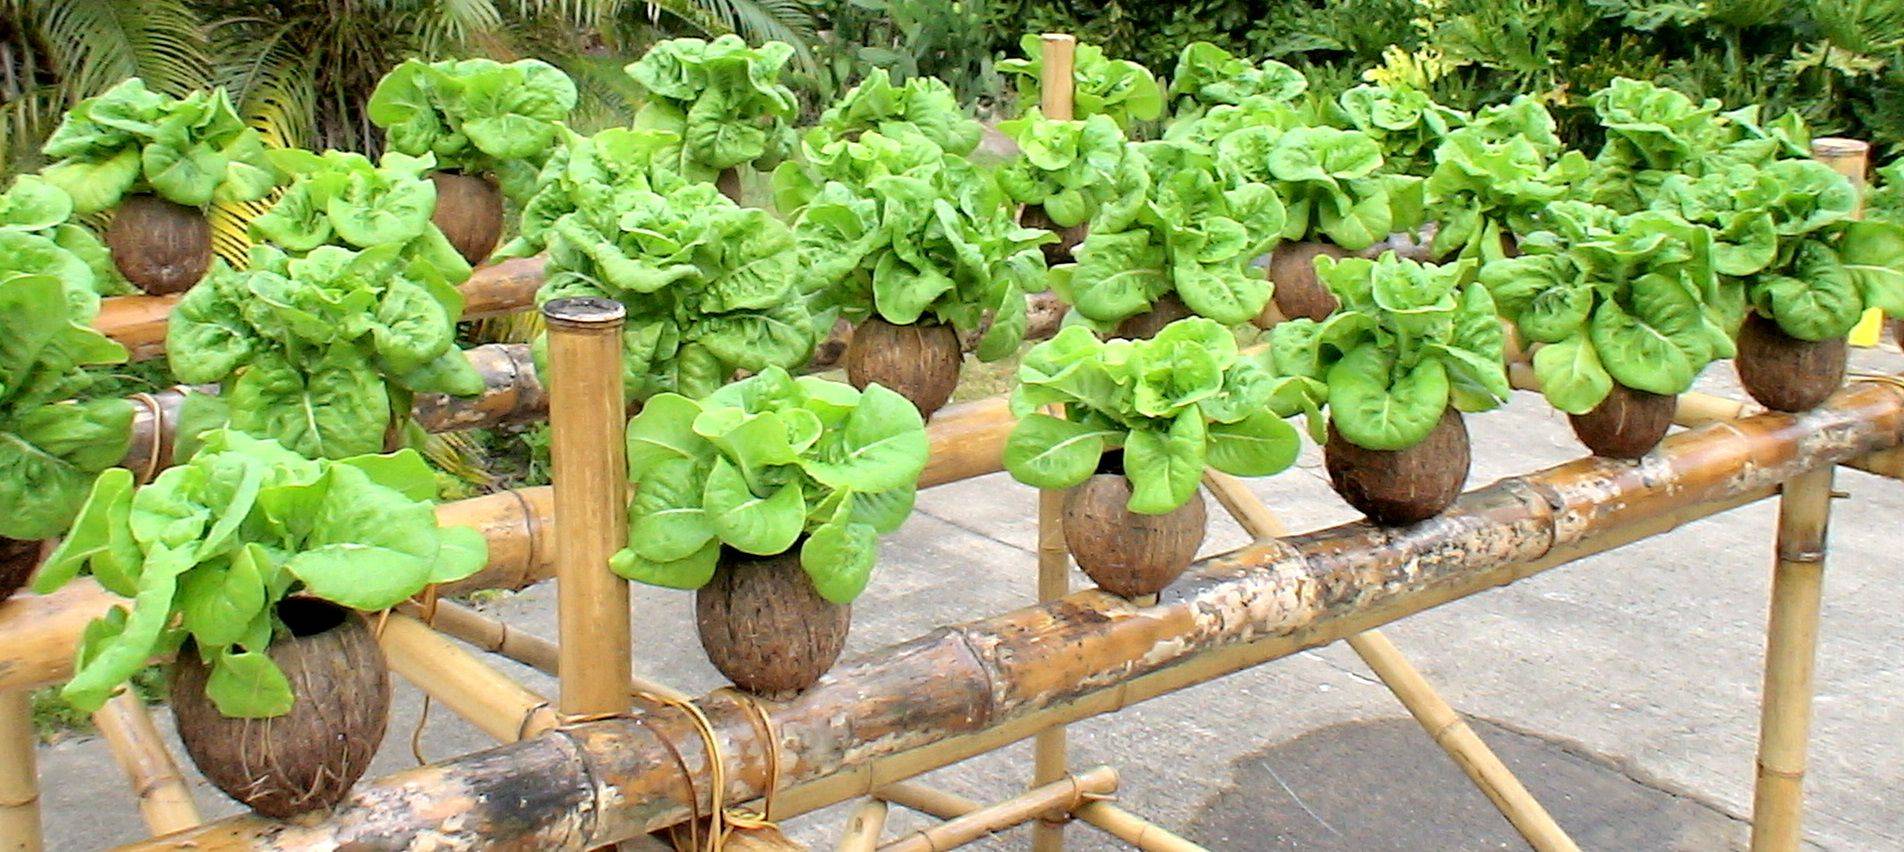 Homemade Hydroponic Systems You Can Make By Yourself Homemade